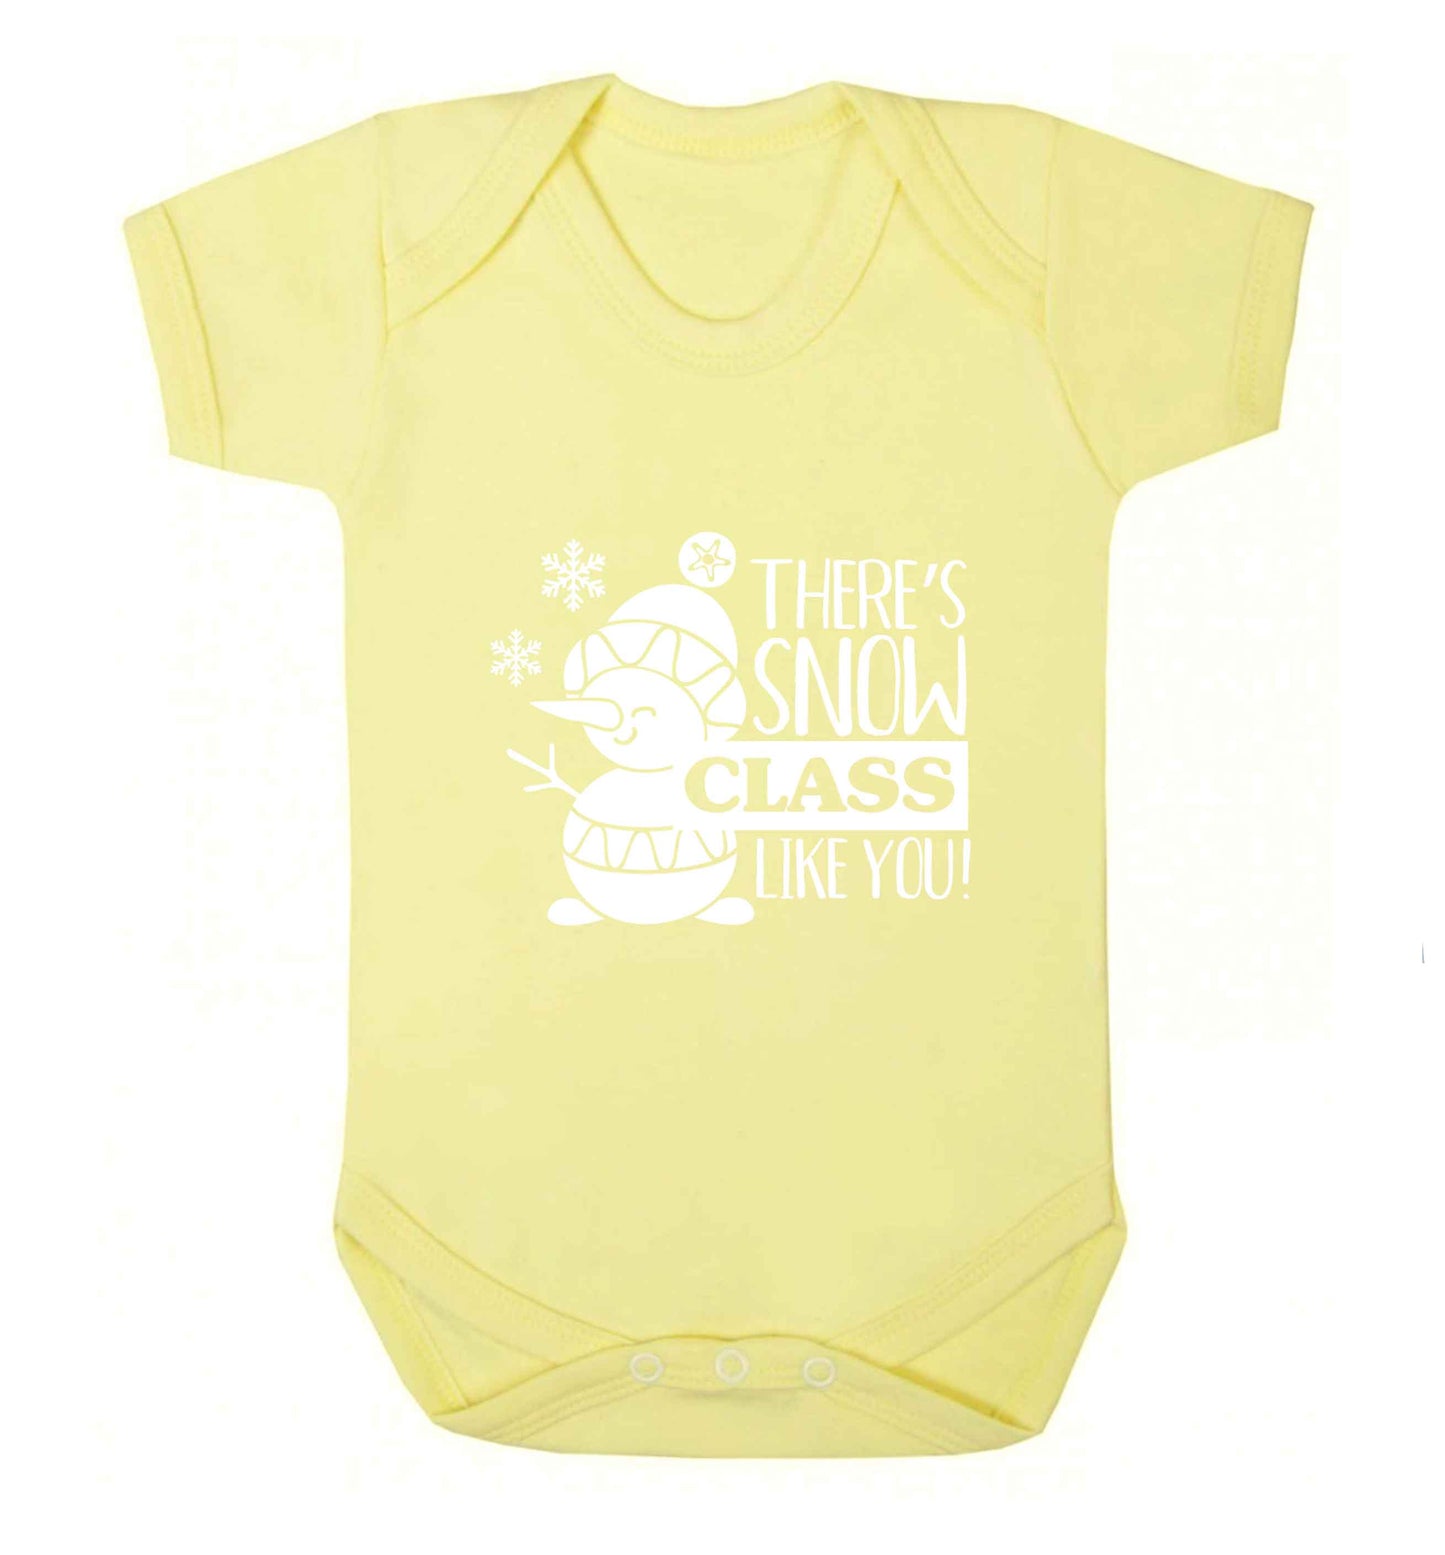 There's snow class like you baby vest pale yellow 18-24 months